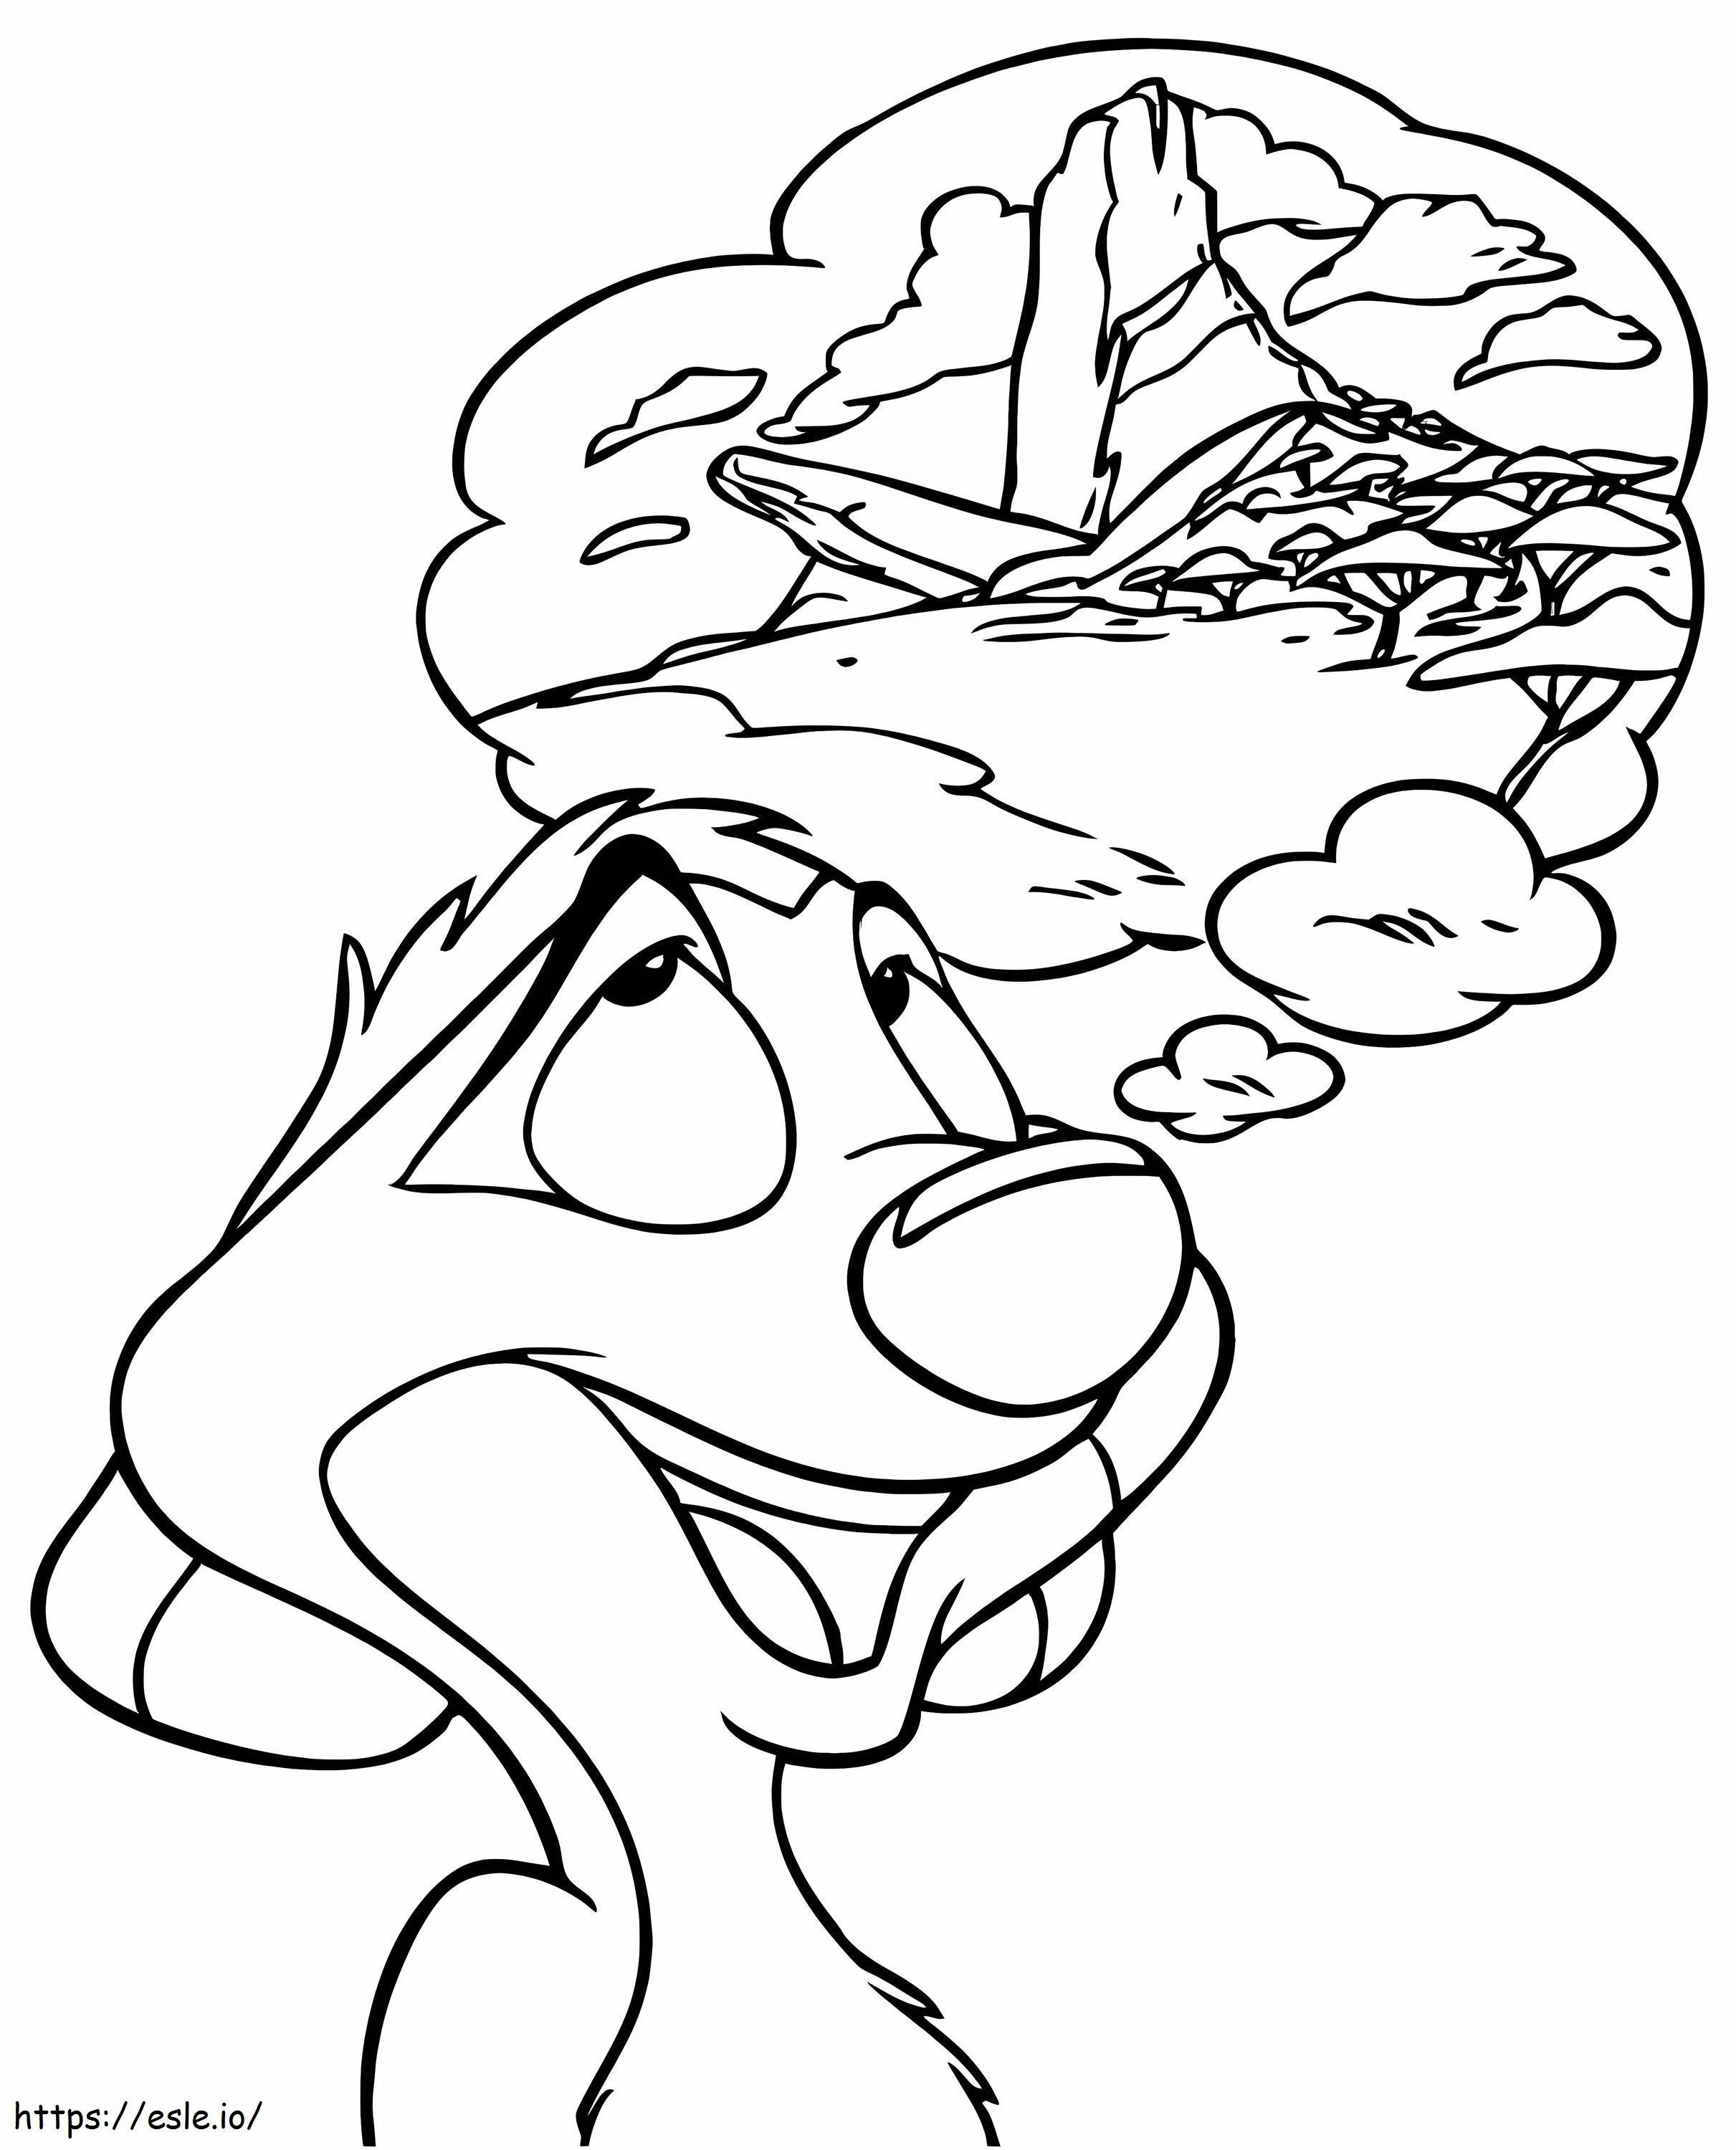 Timon Is Dreaming A4 coloring page